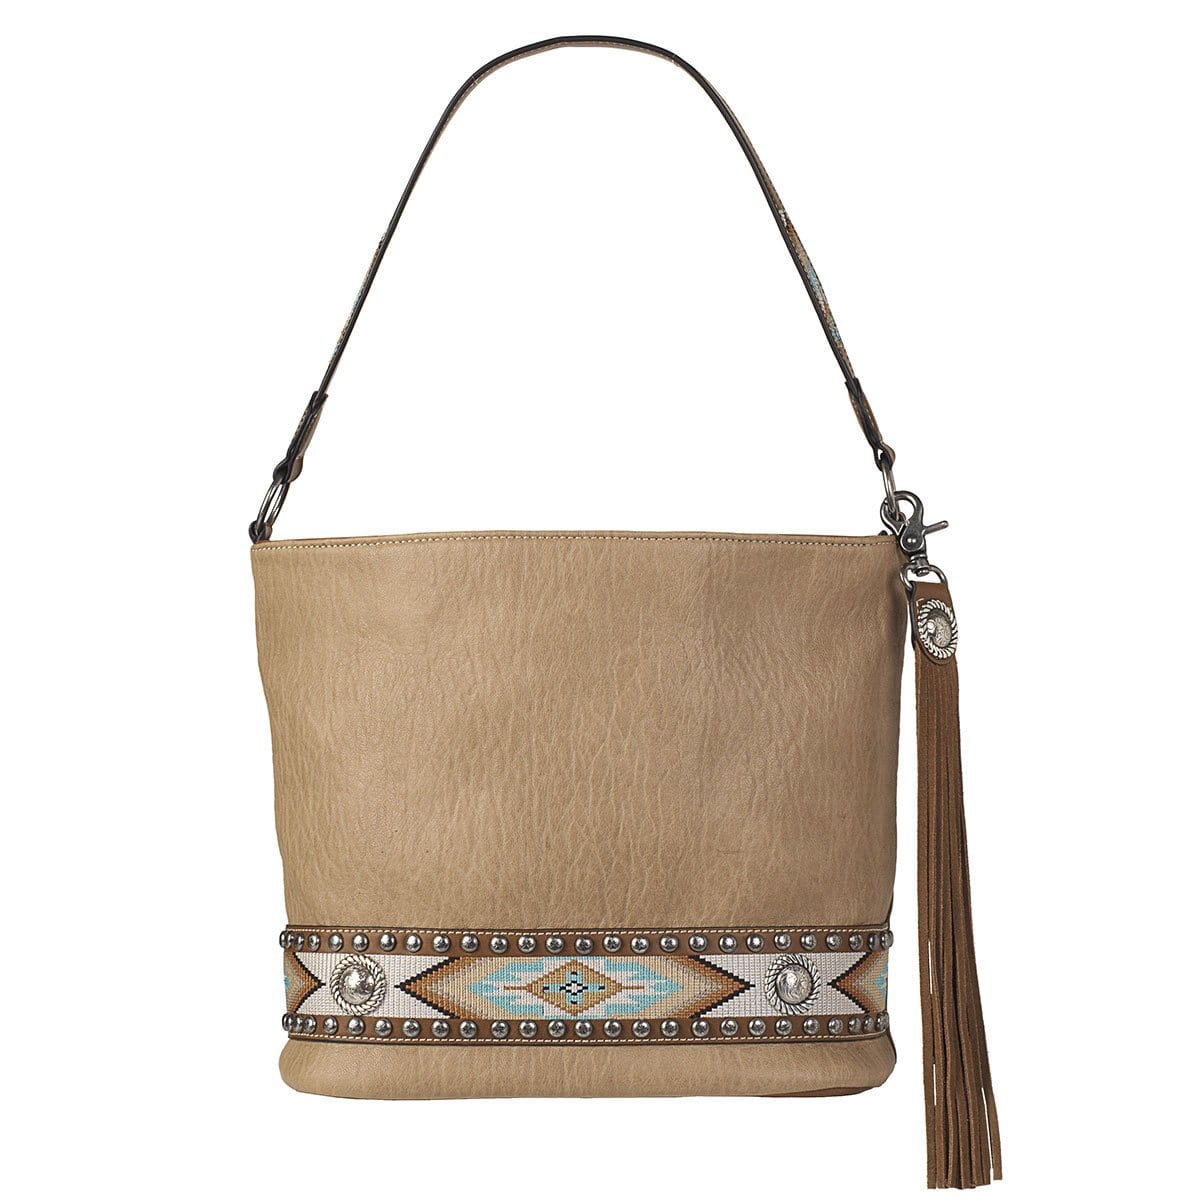 Coco + Carmen NWT Tan Purse - $35 New With Tags - From Hailey